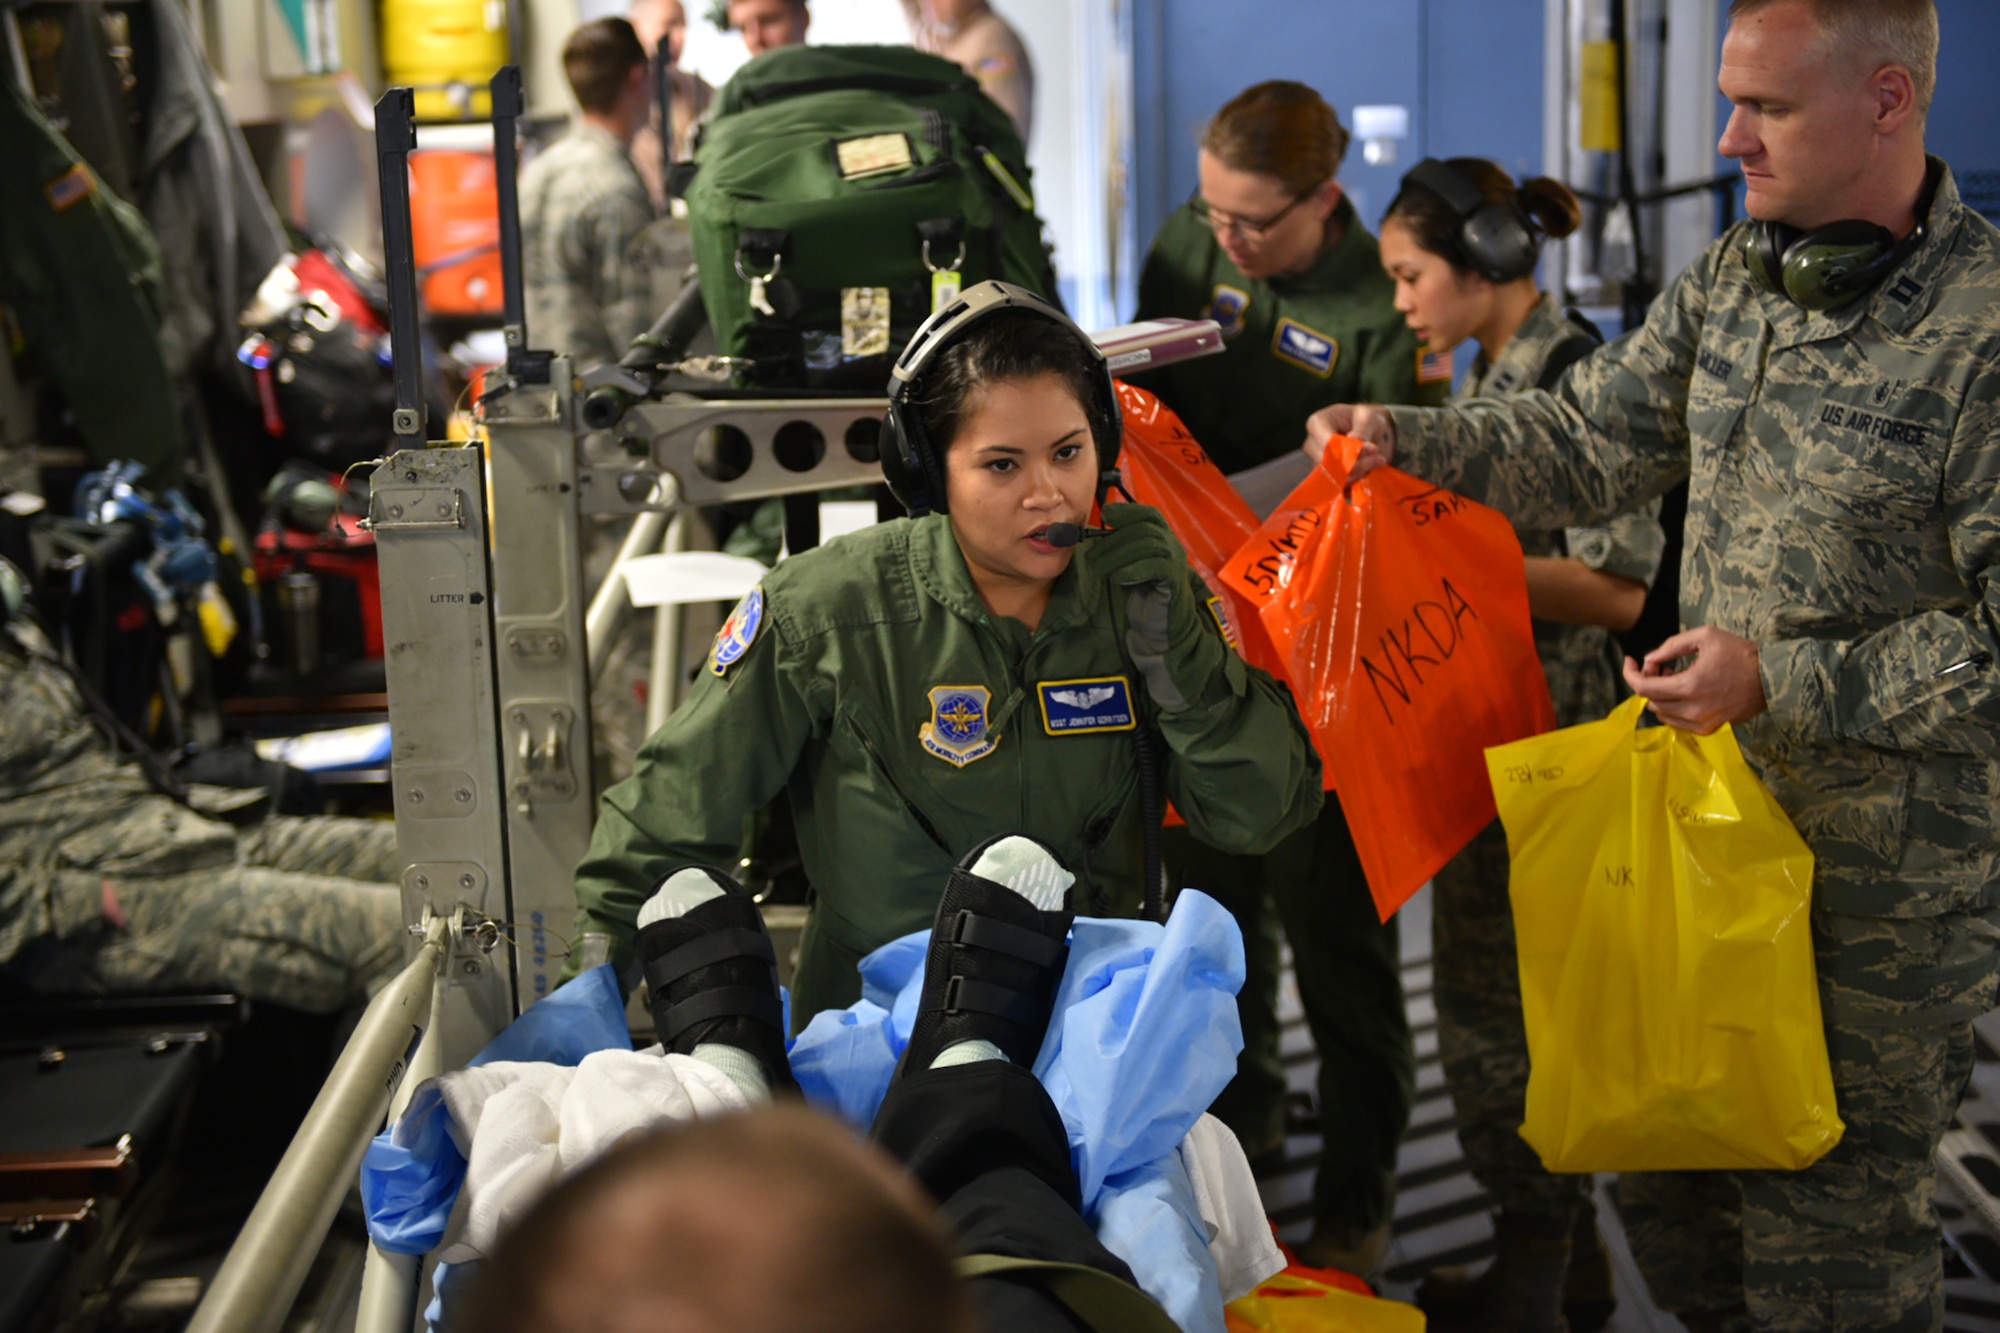 Master Sgt. Jennifer Gerritsen, an aeromedical technician with the 445th Aeromedical Evacuation Squadron, Wright-Patterson Air Force Base, Ohio, helps provide care for wounded warriors while deployed here April 21, 2016. Jennifer and her husband, Kiley, also assigned to the 445th AES, had the opportunity to serve together on this flight as they usually serve on separate crews tasked to rotate moving medical patients from down range to Germany and/or back to the United States. Even though they are on separate crews, their paths often cross as crews help others with preparing the aircraft and loading patients before going off on missions. (U.S. Air Force photo/Tech. Sgt. Frank Oliver)